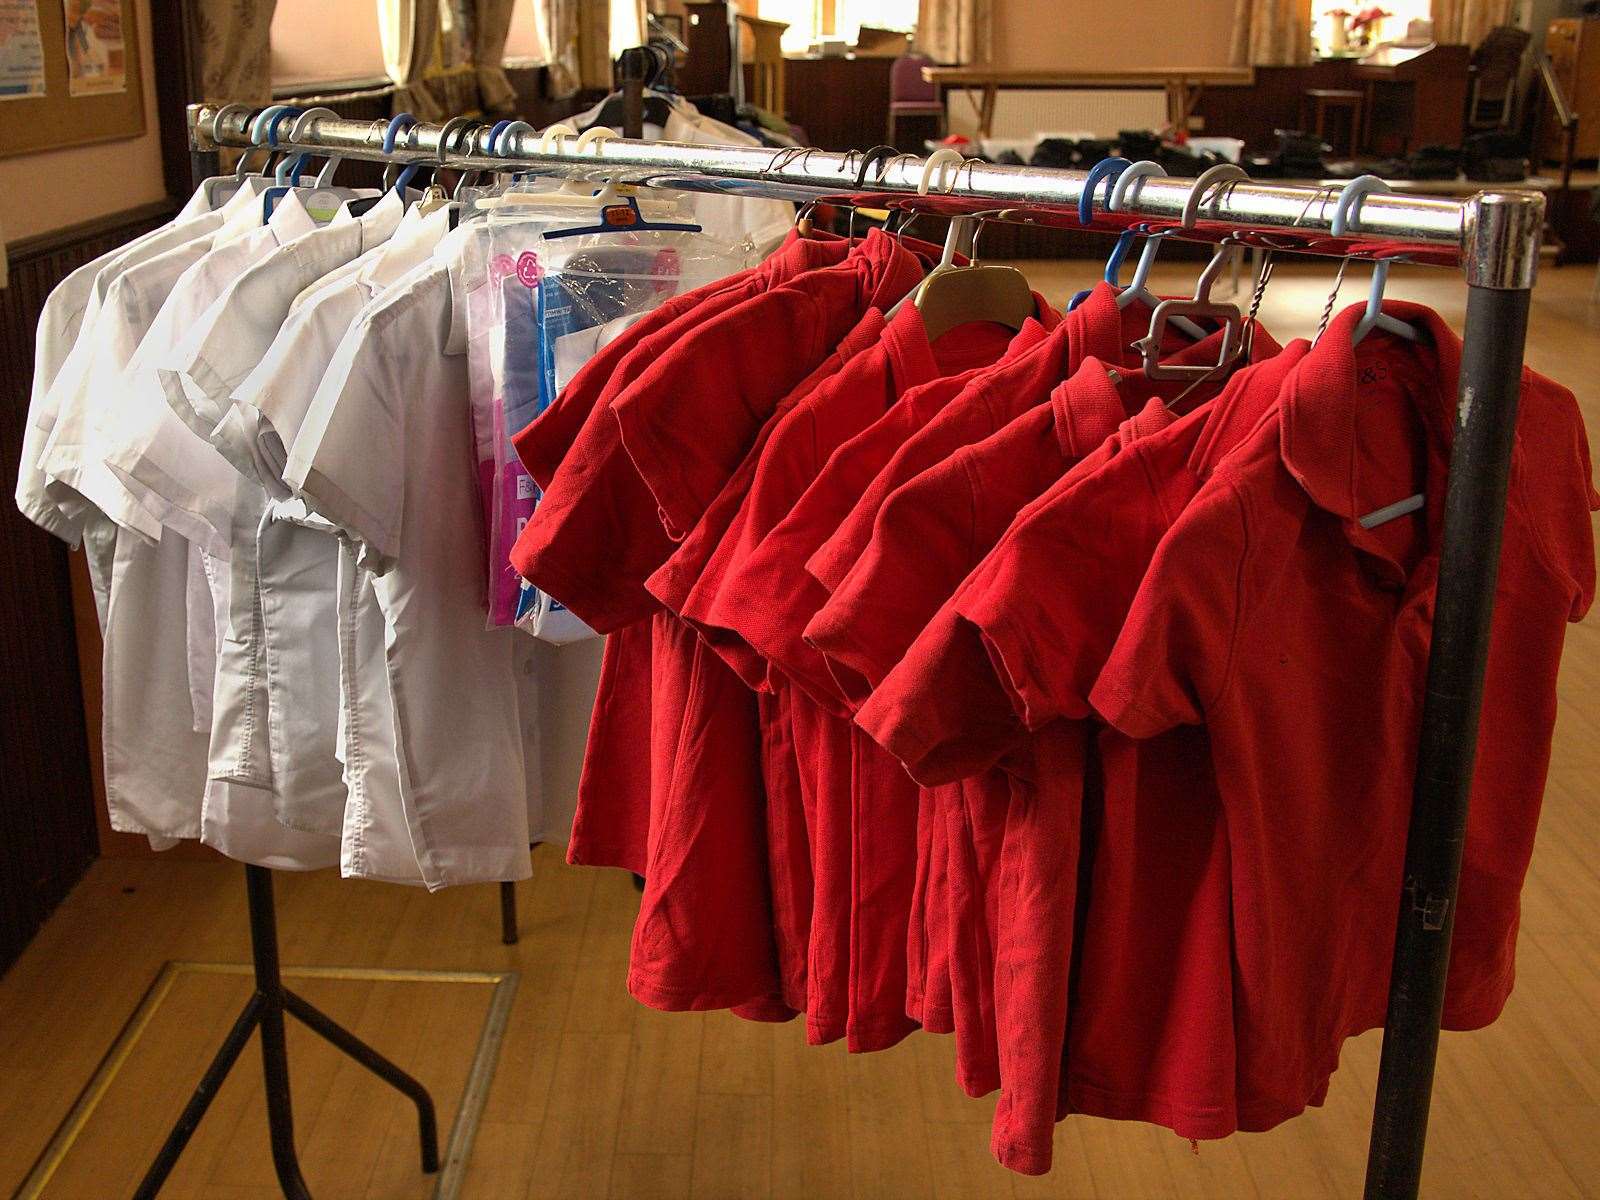 There are a wide variety of uniforms available.